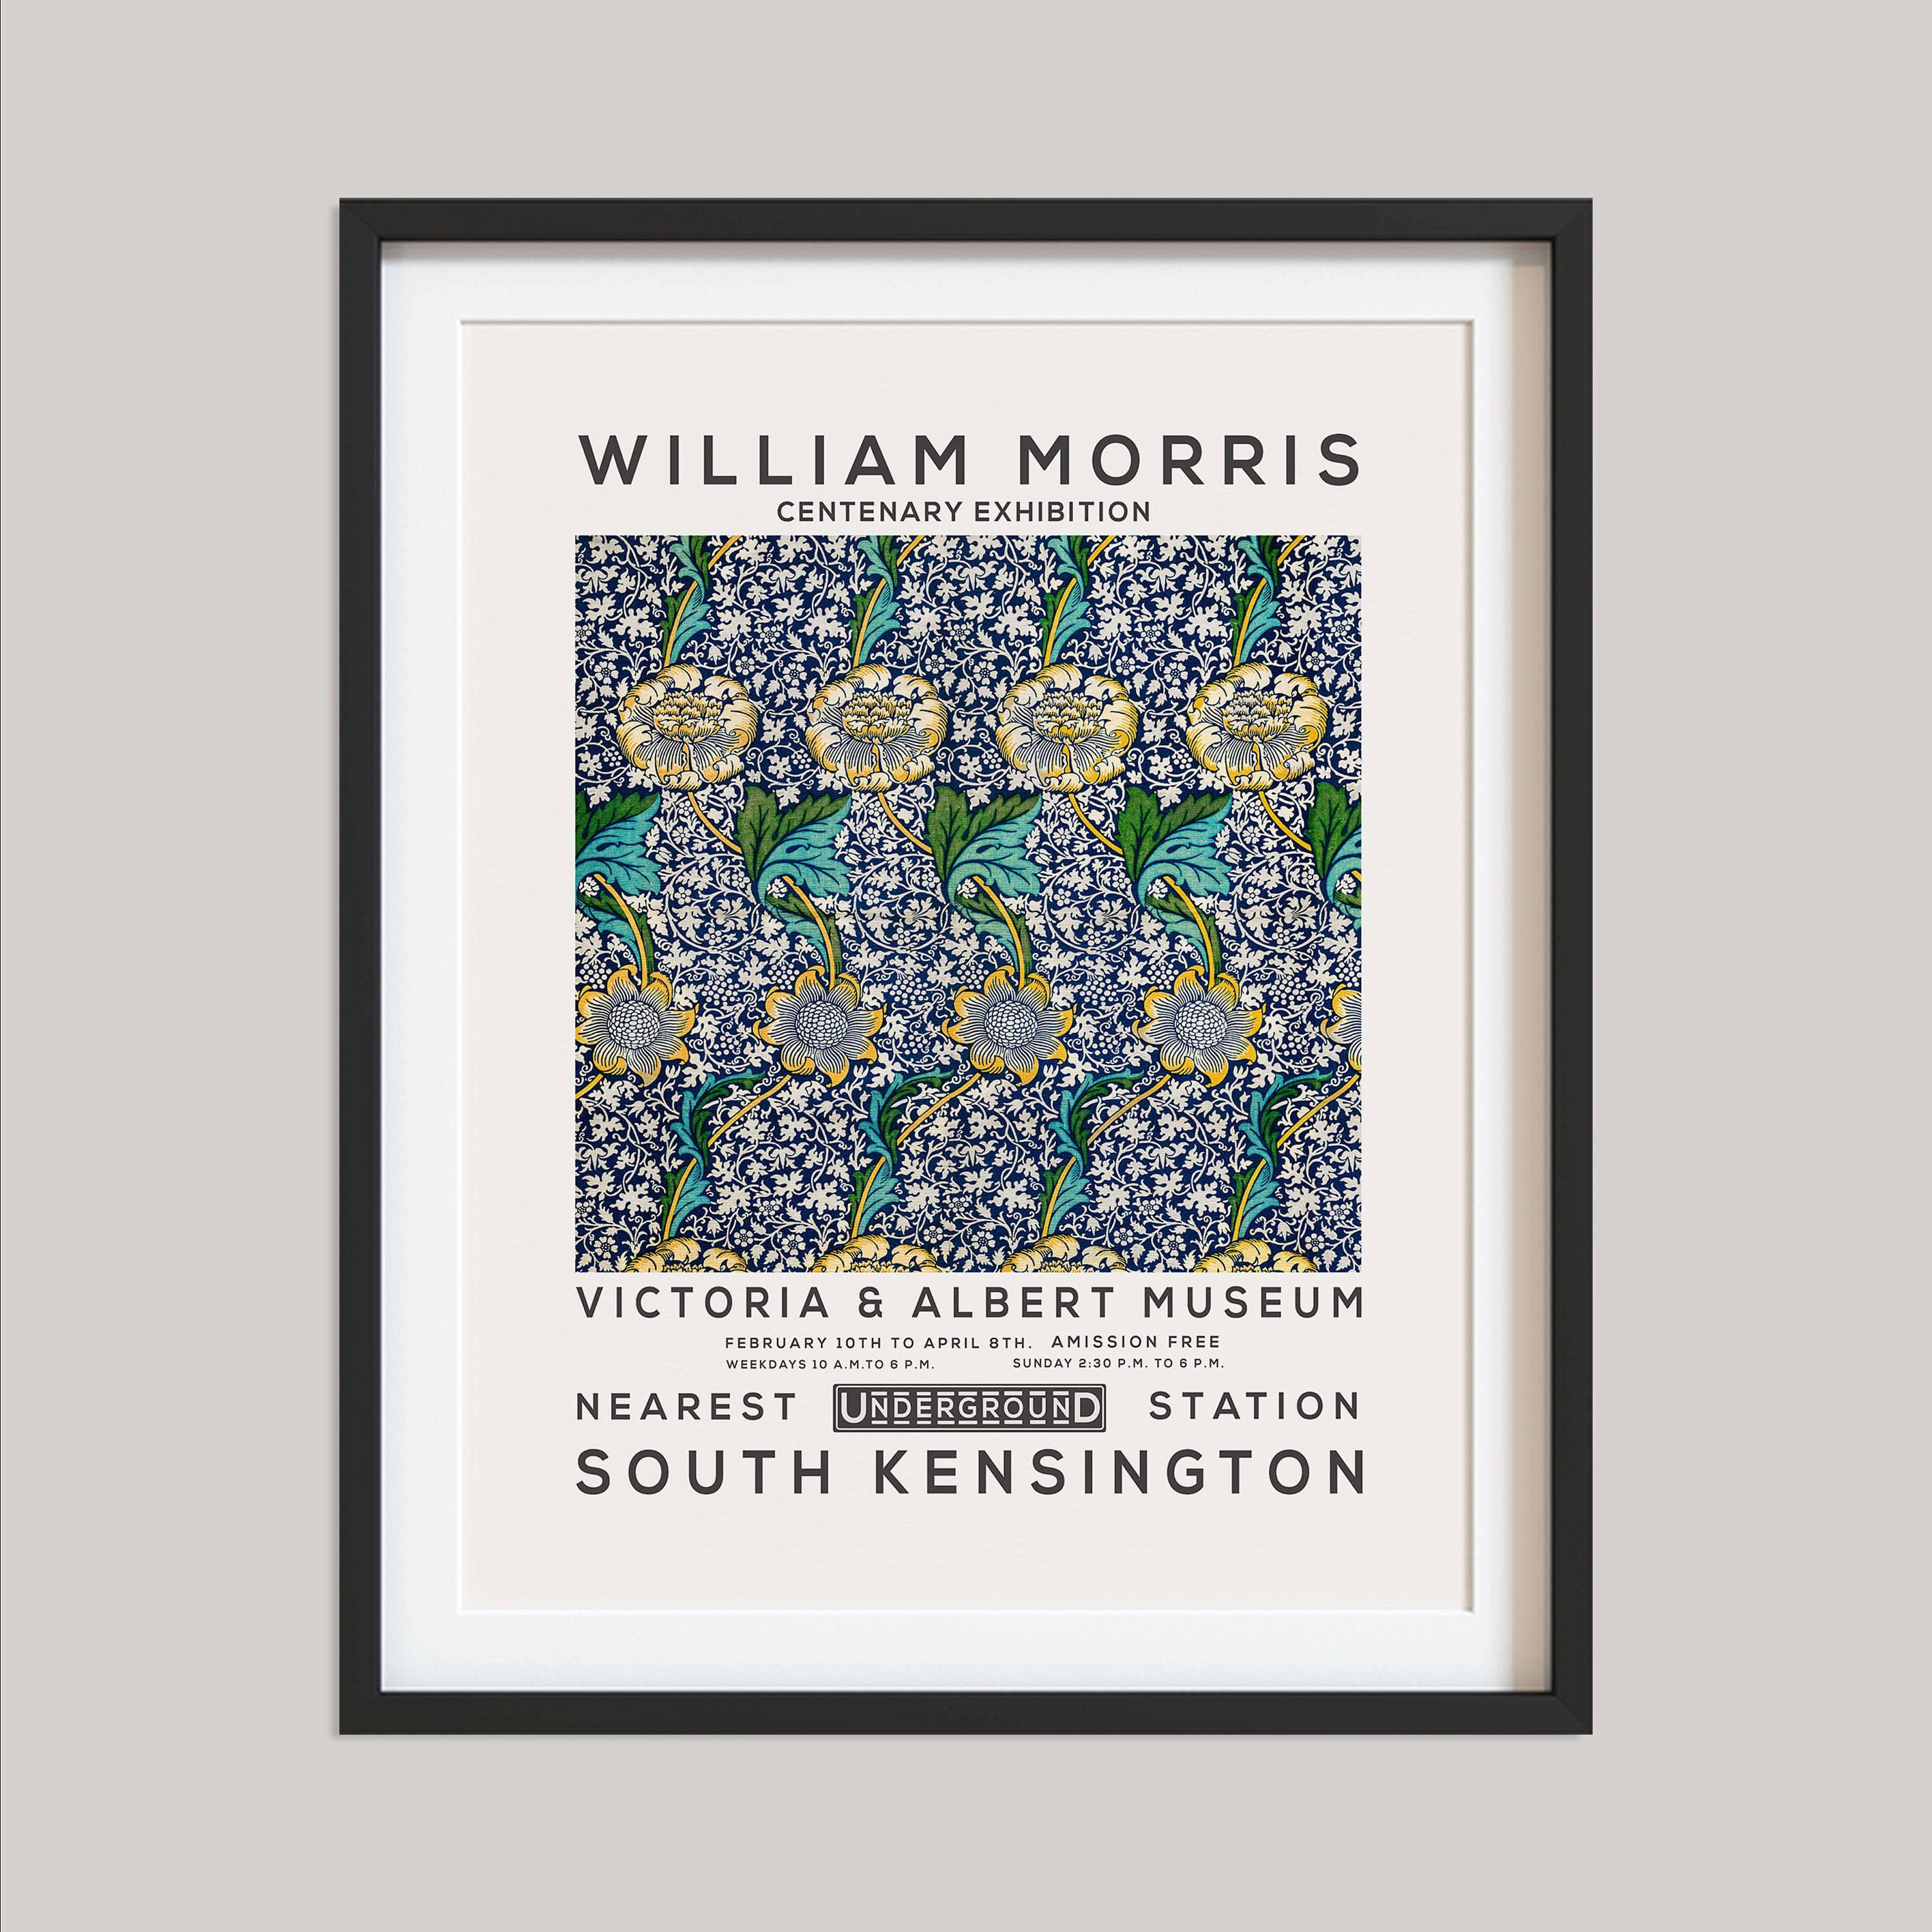 William Morris Print, Vintage Wall Decor, Exhibition Poster, Floral Wall Art, Flower Print, Home Decor, Kenneth